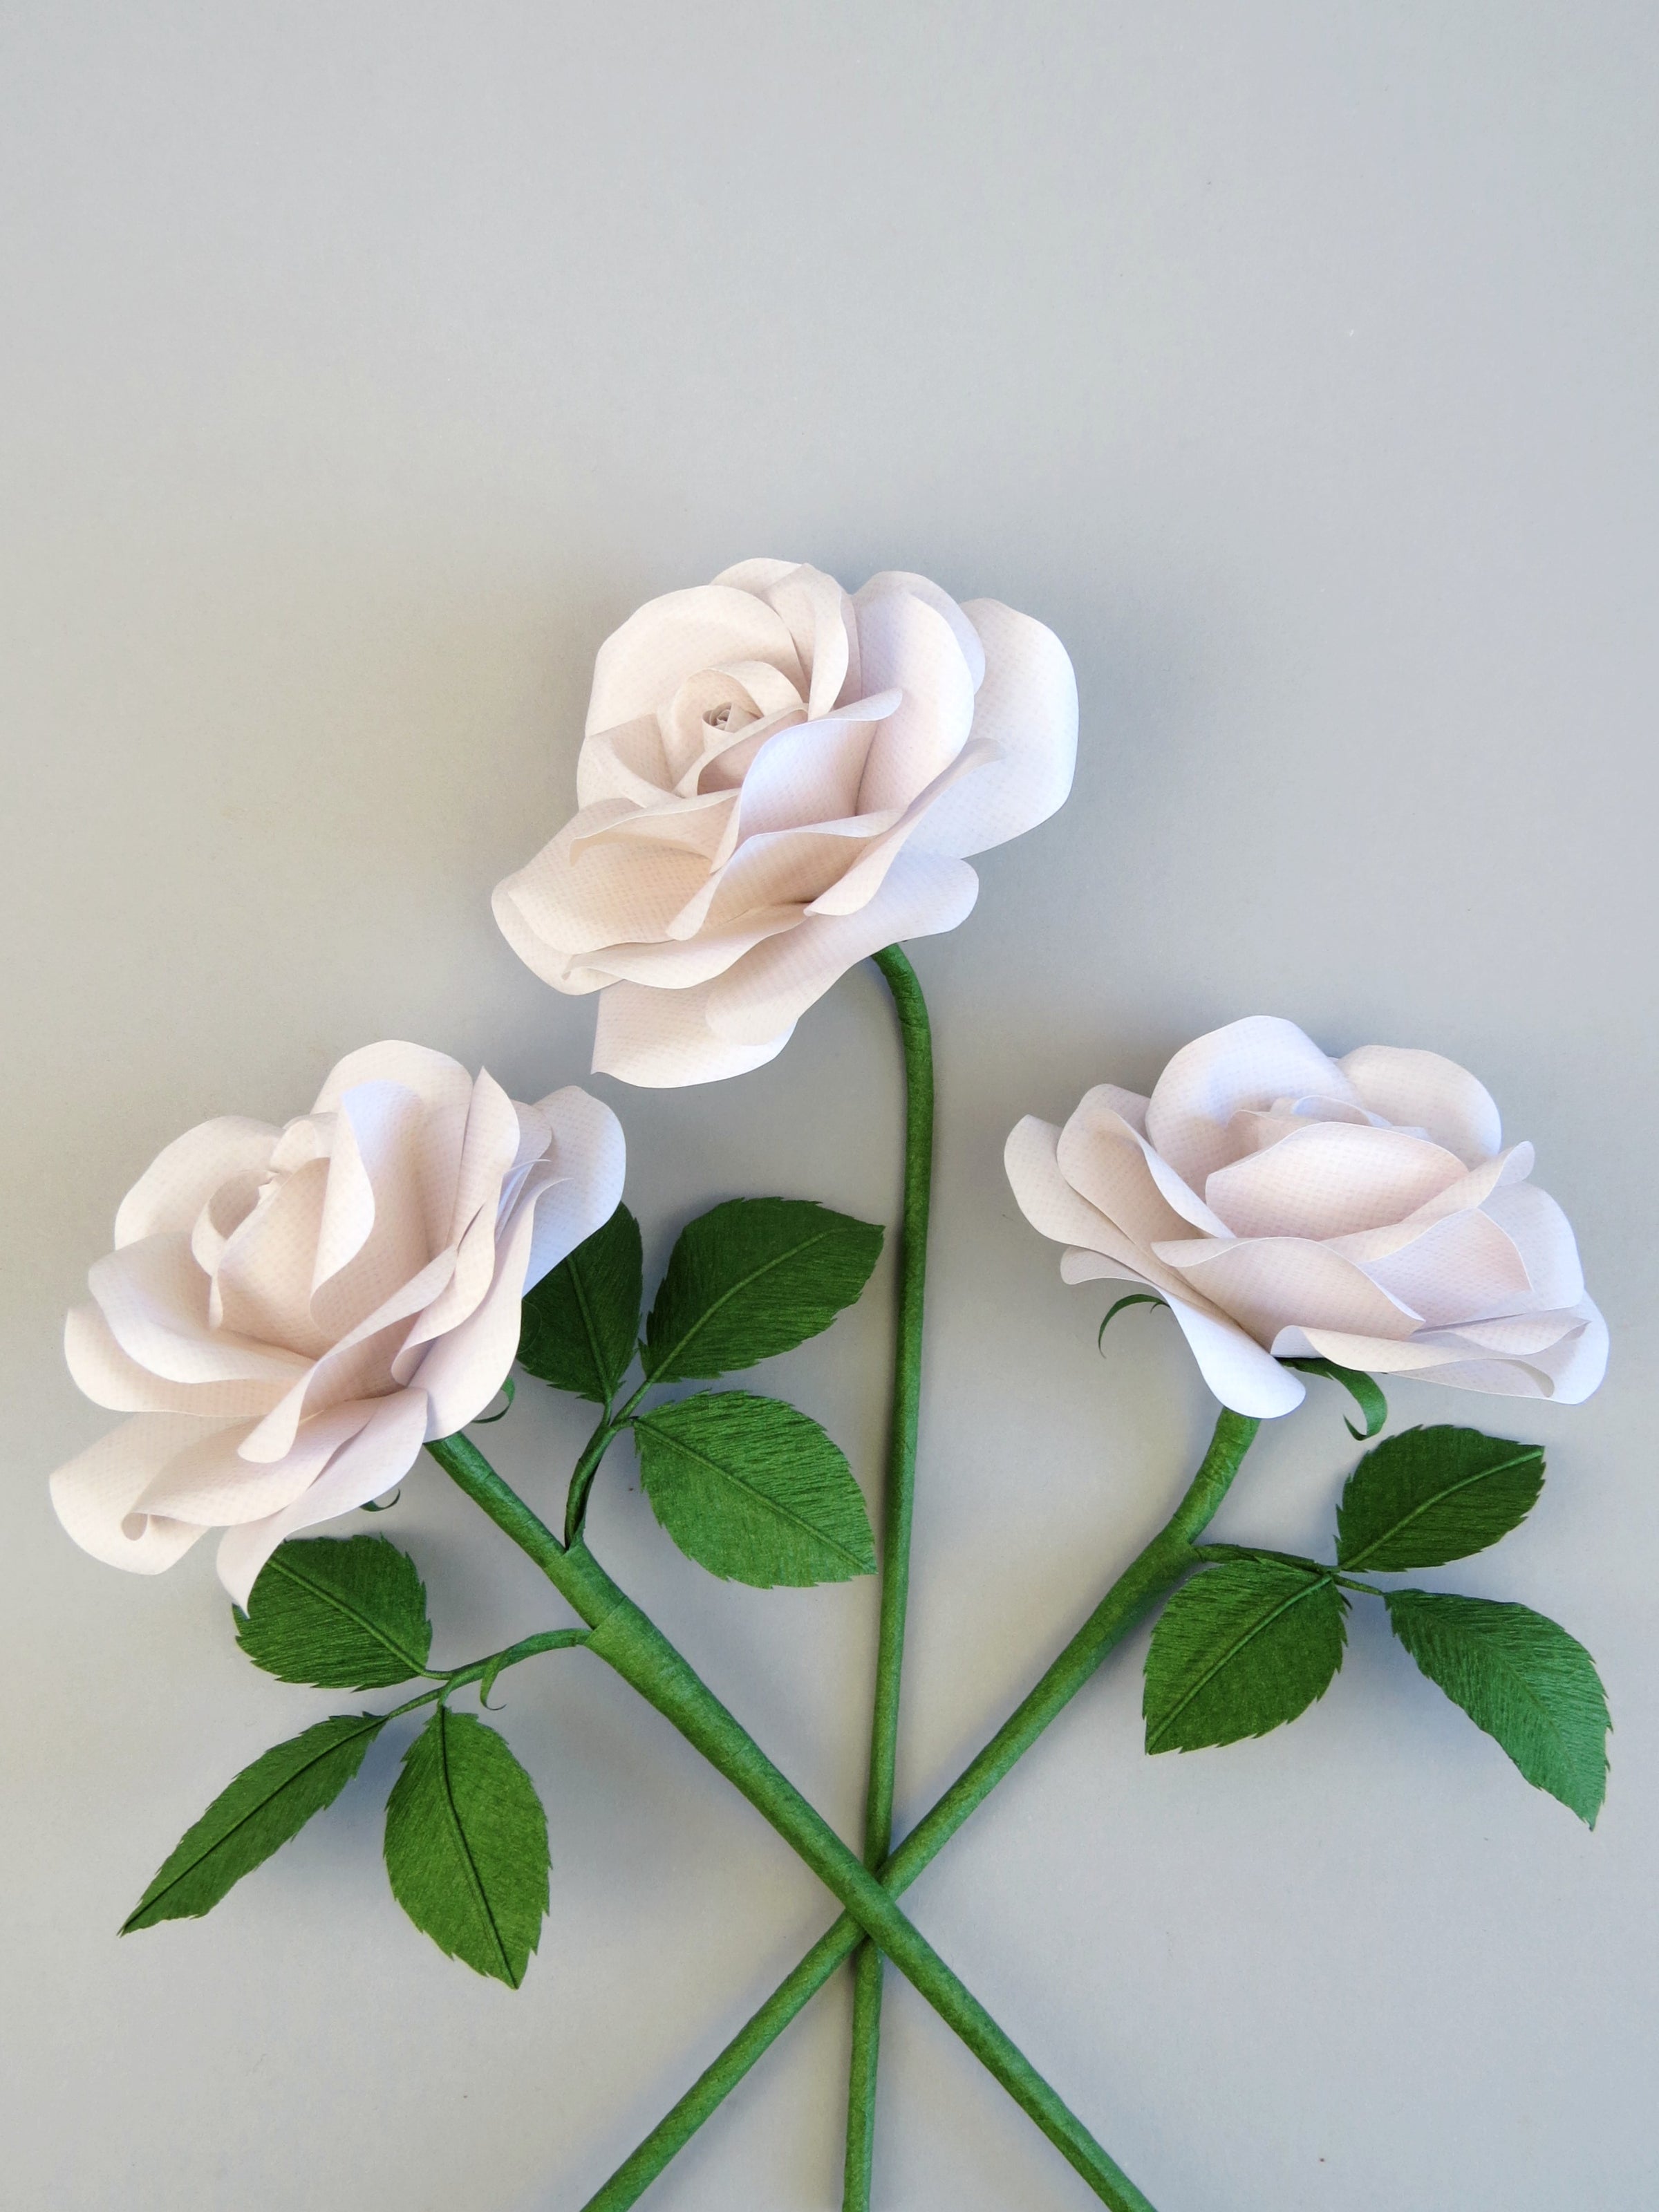 Three white linen grain paper roses randomly laid out next to each other on a light grey background. The left rose has six green leaves attached, the high middle rose has no leaves and the right rose has three leaves. 